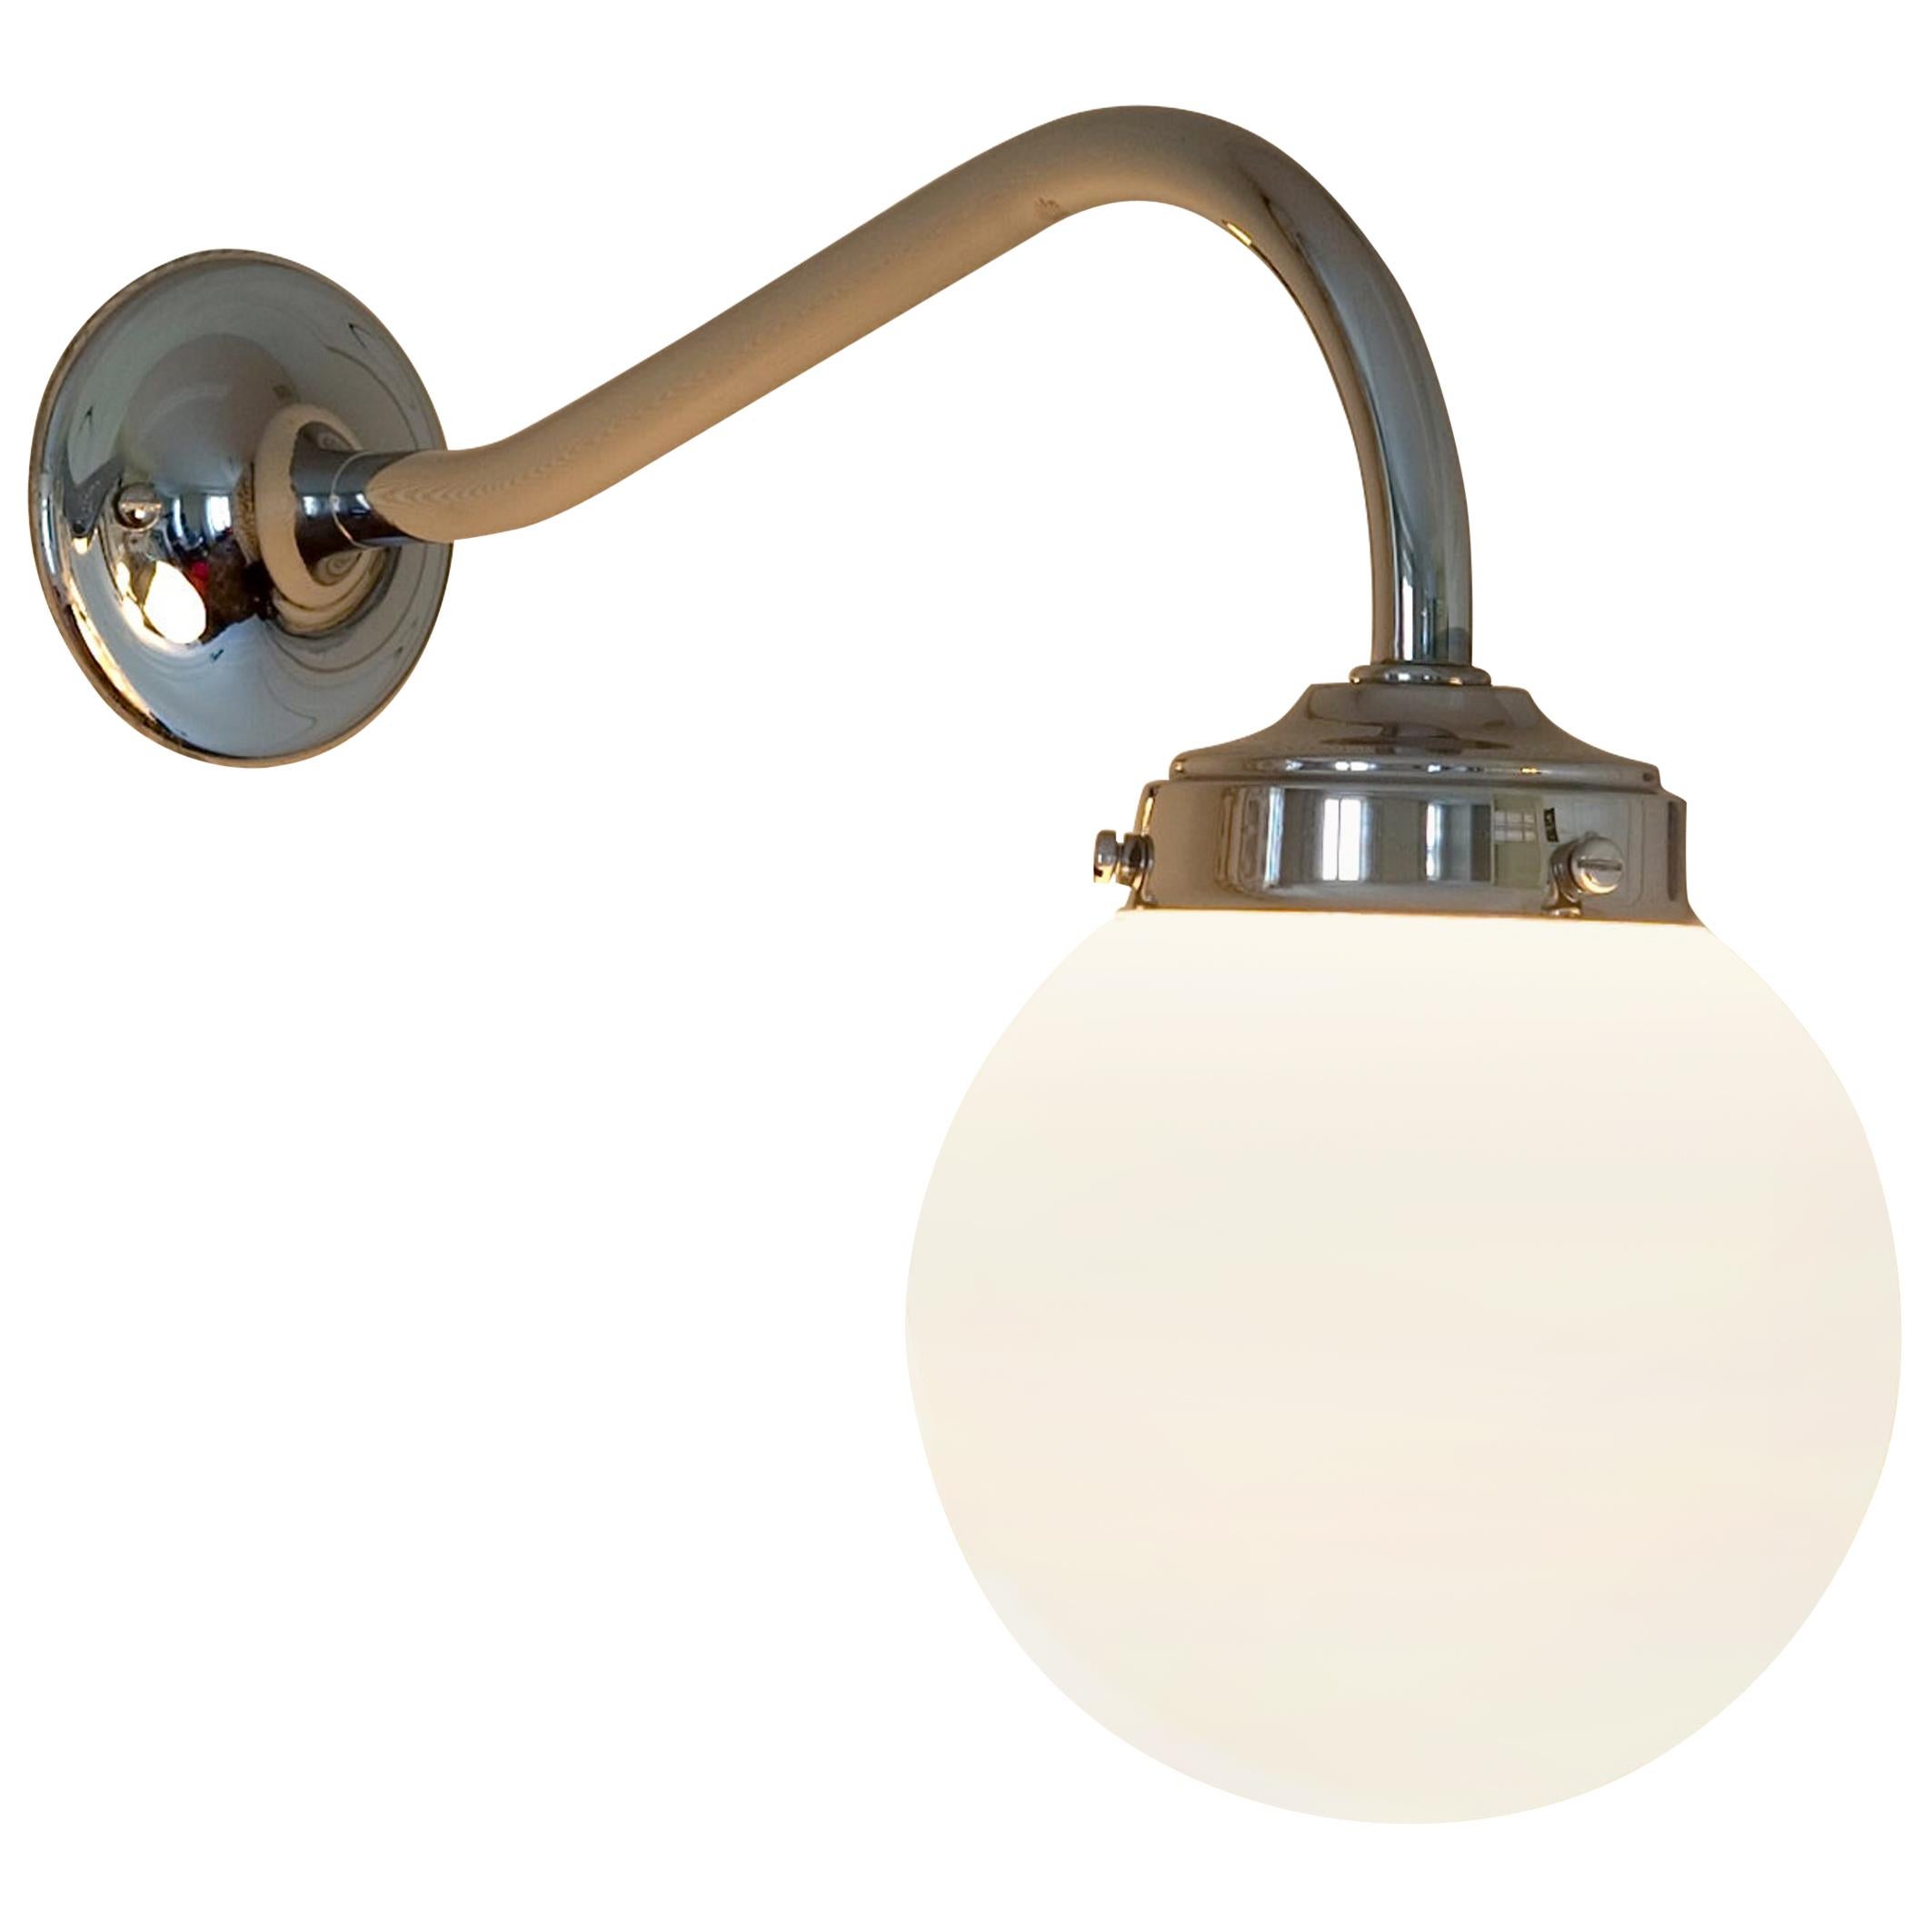 Tekna Clovelly Wall Light with Polished Chrome Finish Plated Brass